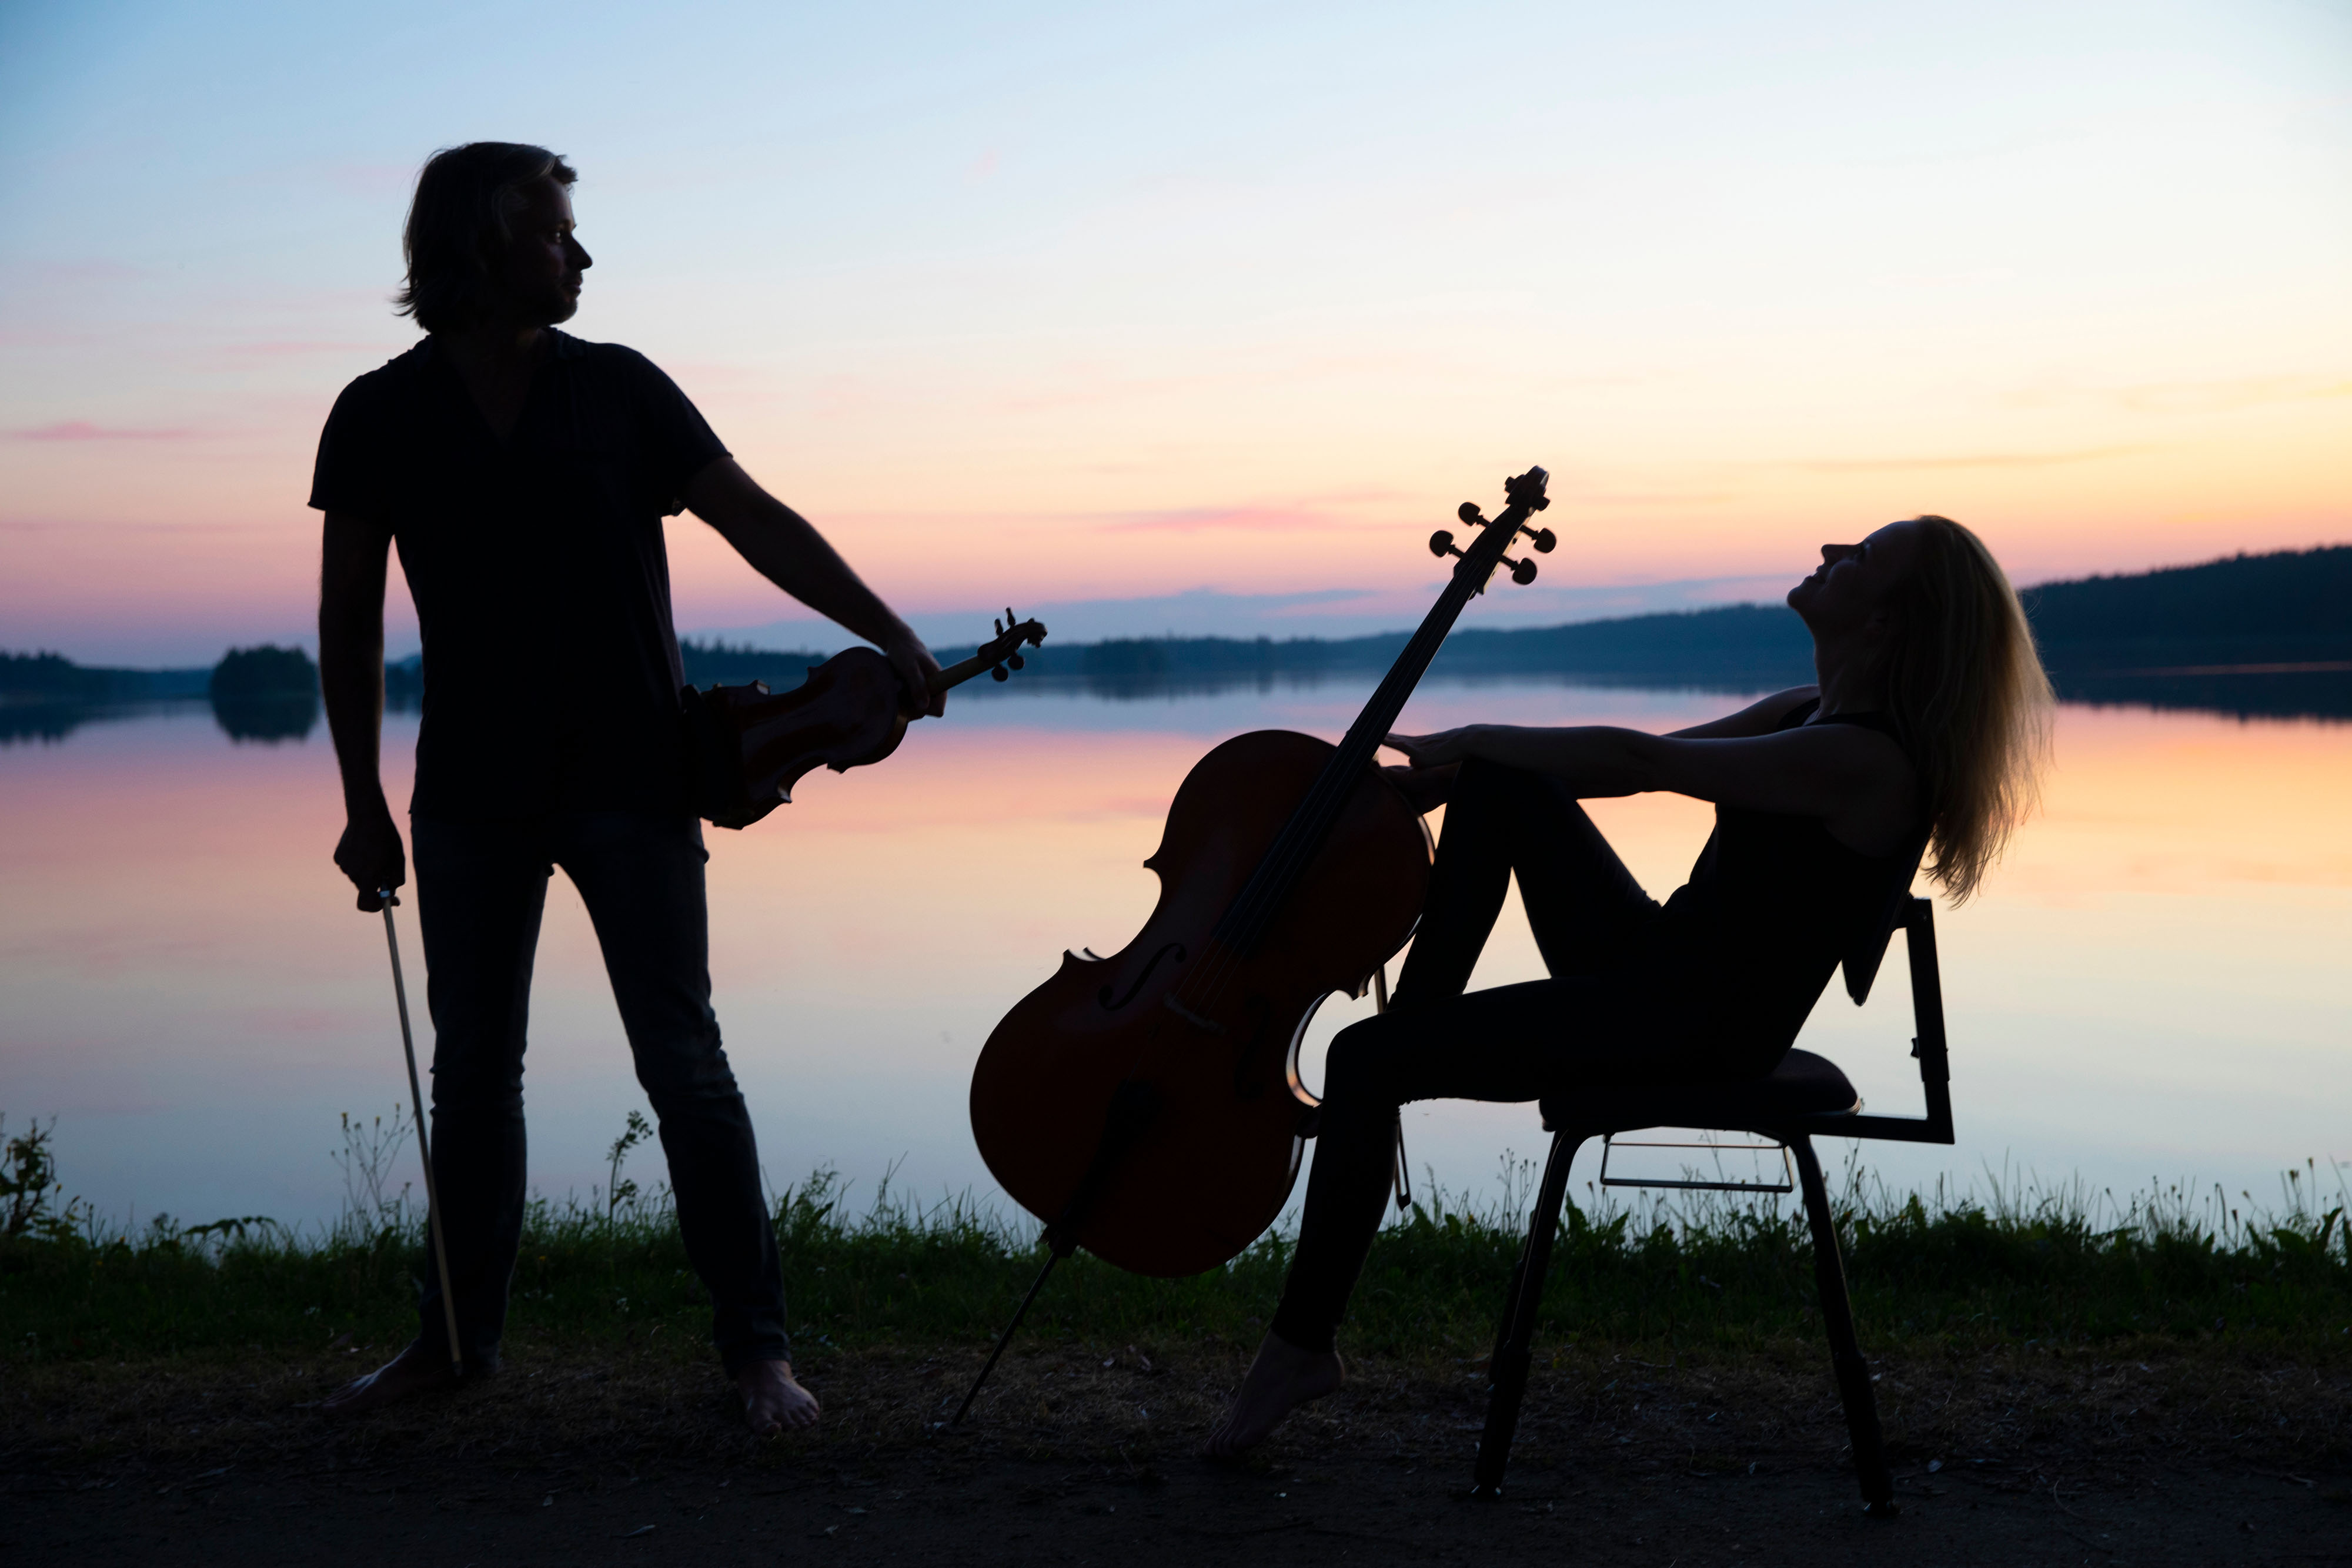 A man holding a violin and a woman with a cello are silhoueted by the sunset next to a lake.